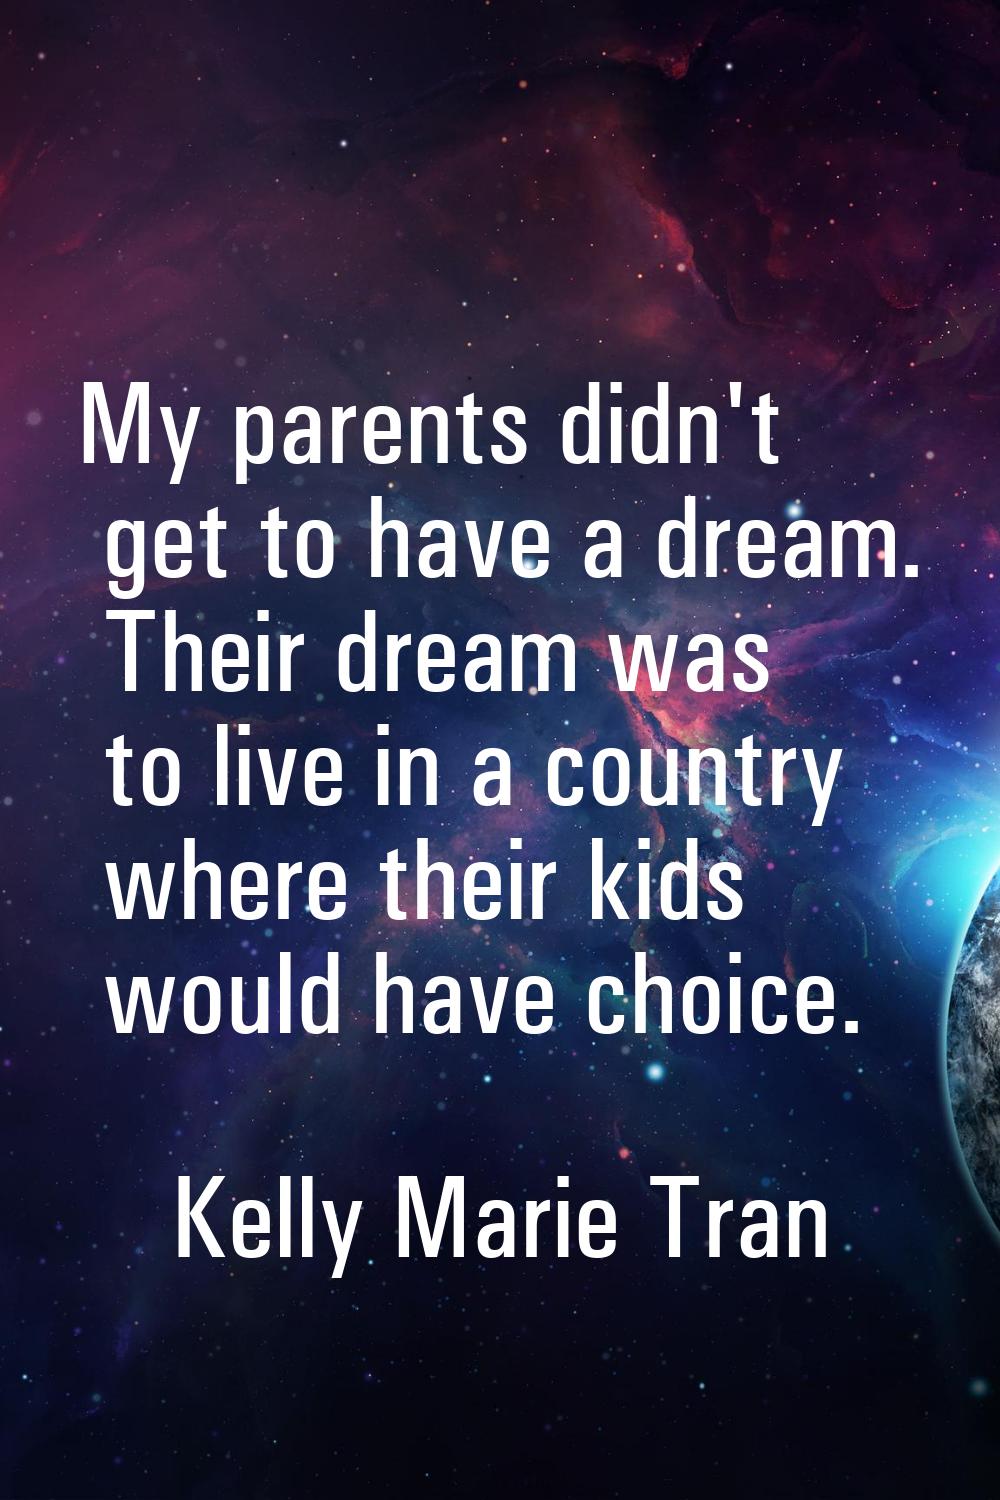 My parents didn't get to have a dream. Their dream was to live in a country where their kids would 